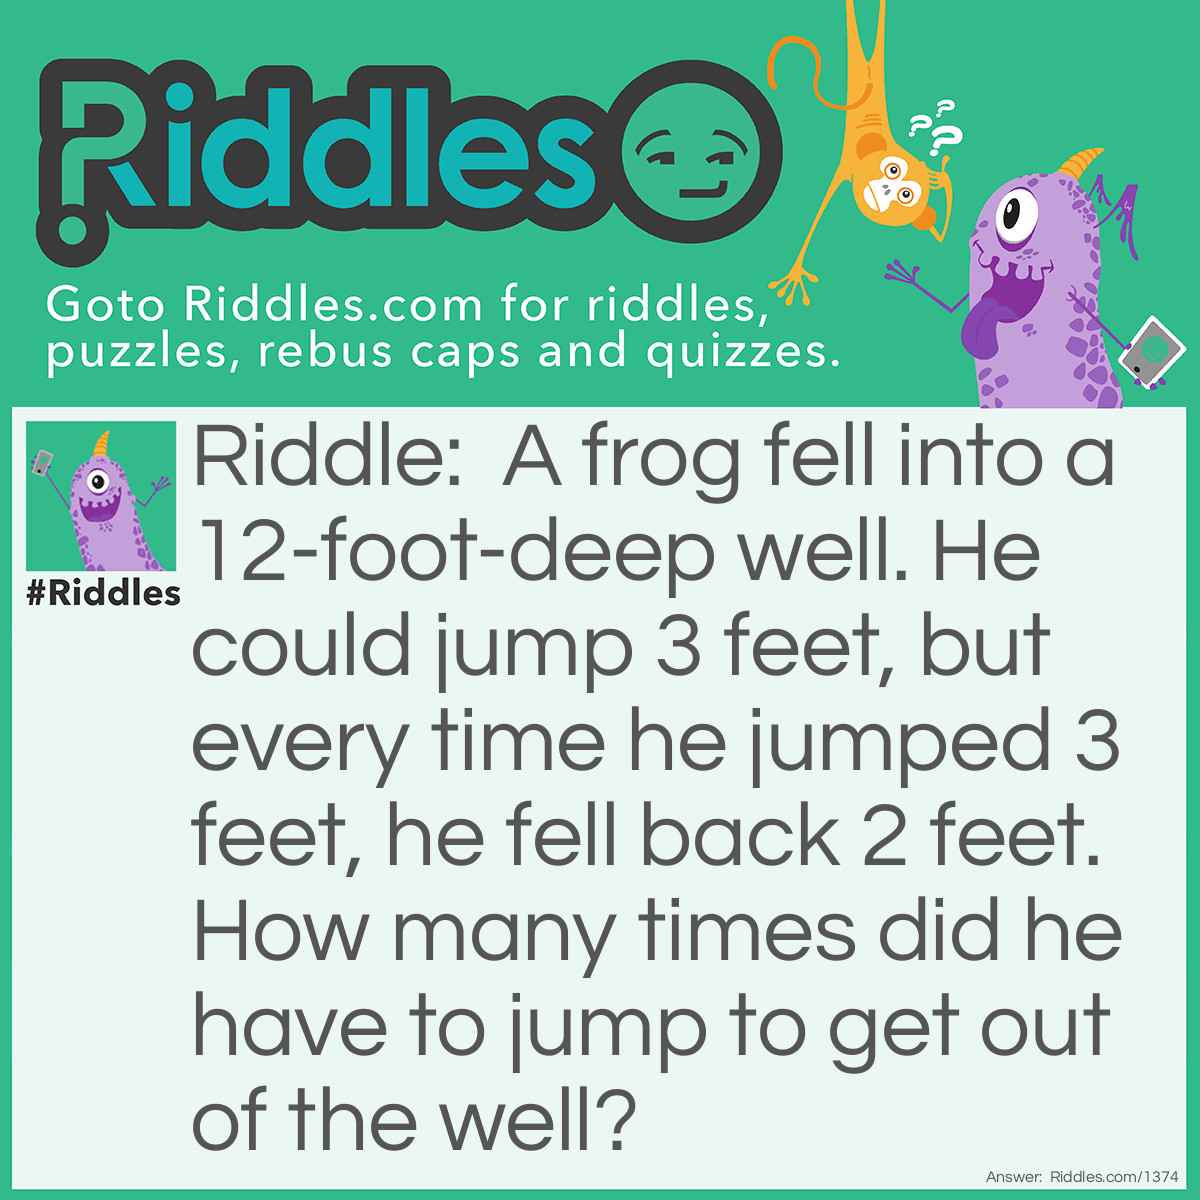 Riddle: A frog fell into a well 12 feet deep. He could jump 3 feet, but every time he jumped 3 feet, he fell back 2 feet. How many times did he have to jump to get out of the well? Answer: The tenth jump took him out. (On the tenth jump he reached 13 feet and was out.)